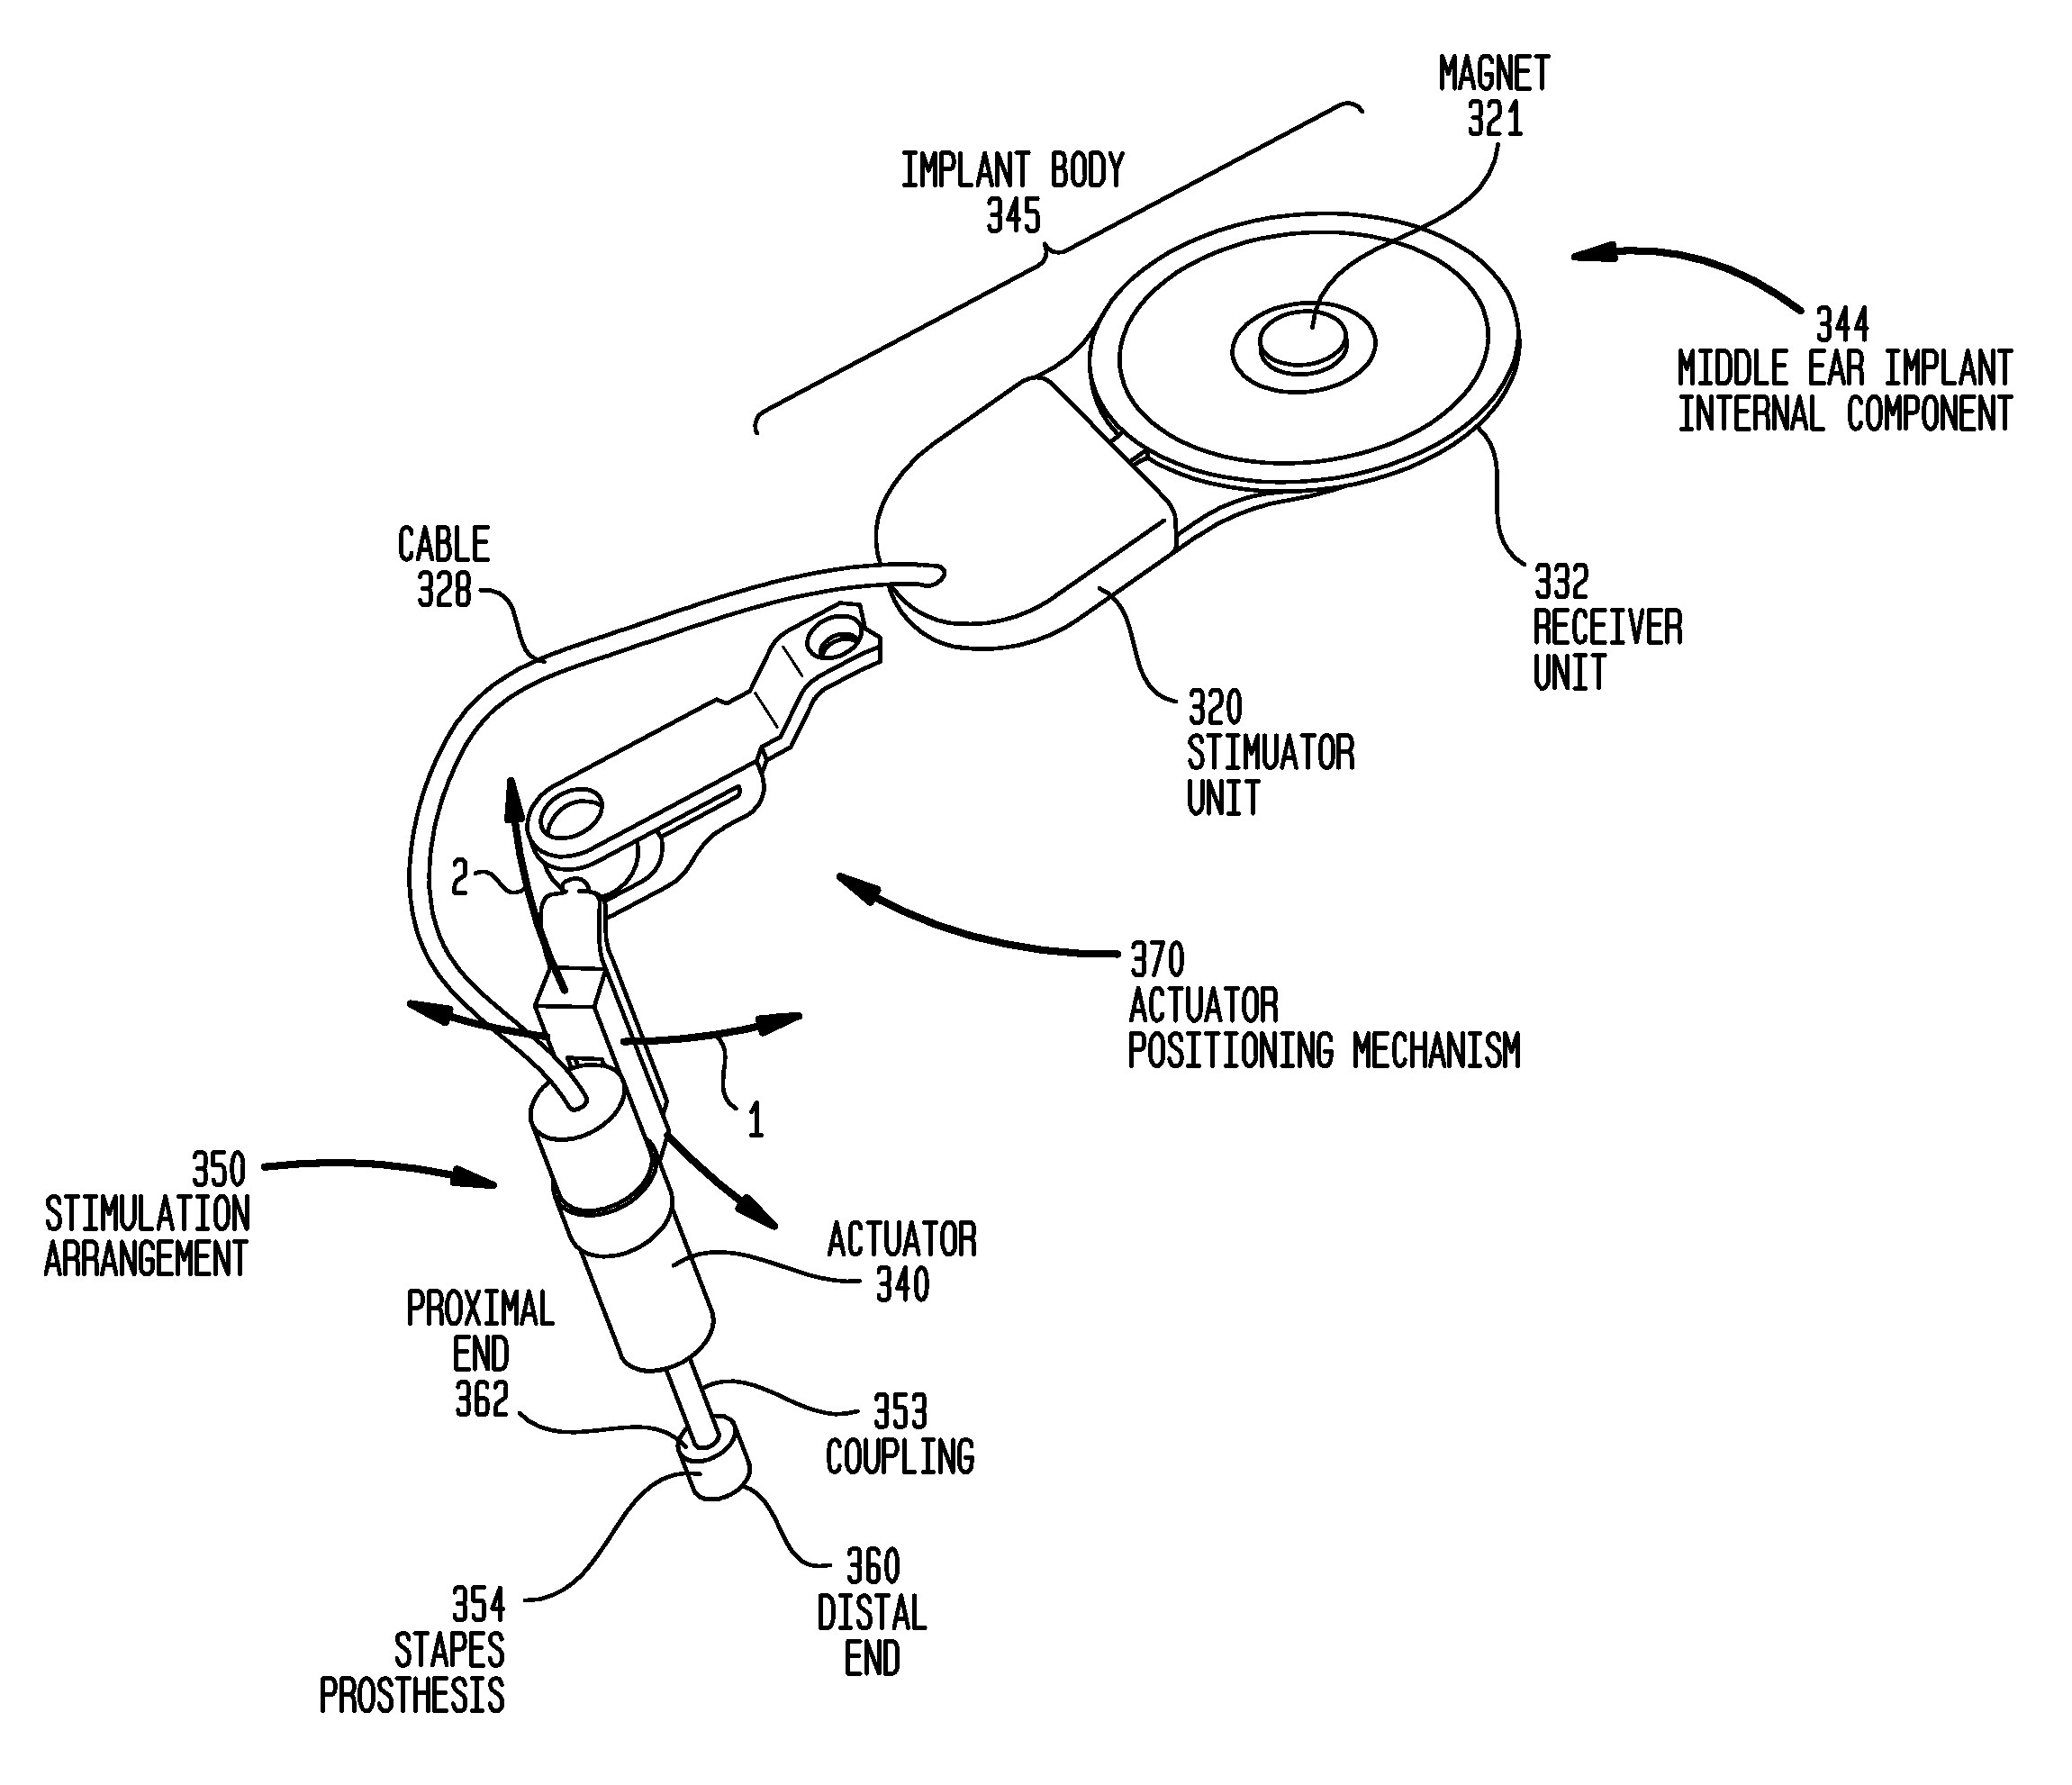 Combined functional component and implantable actuator positioning mechanism